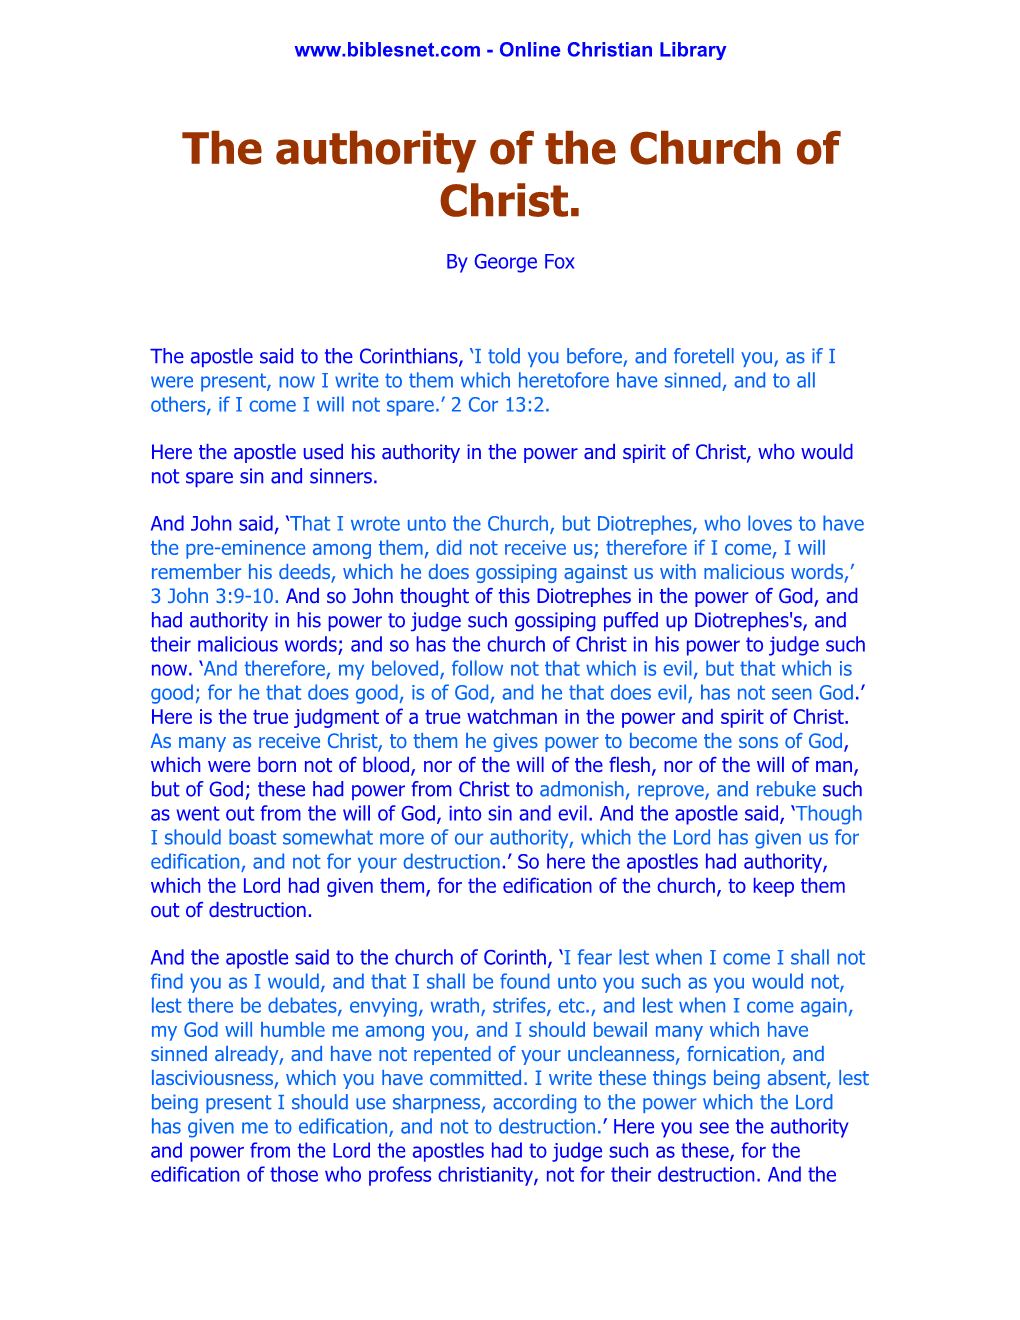 The Authority of the Church of Christ